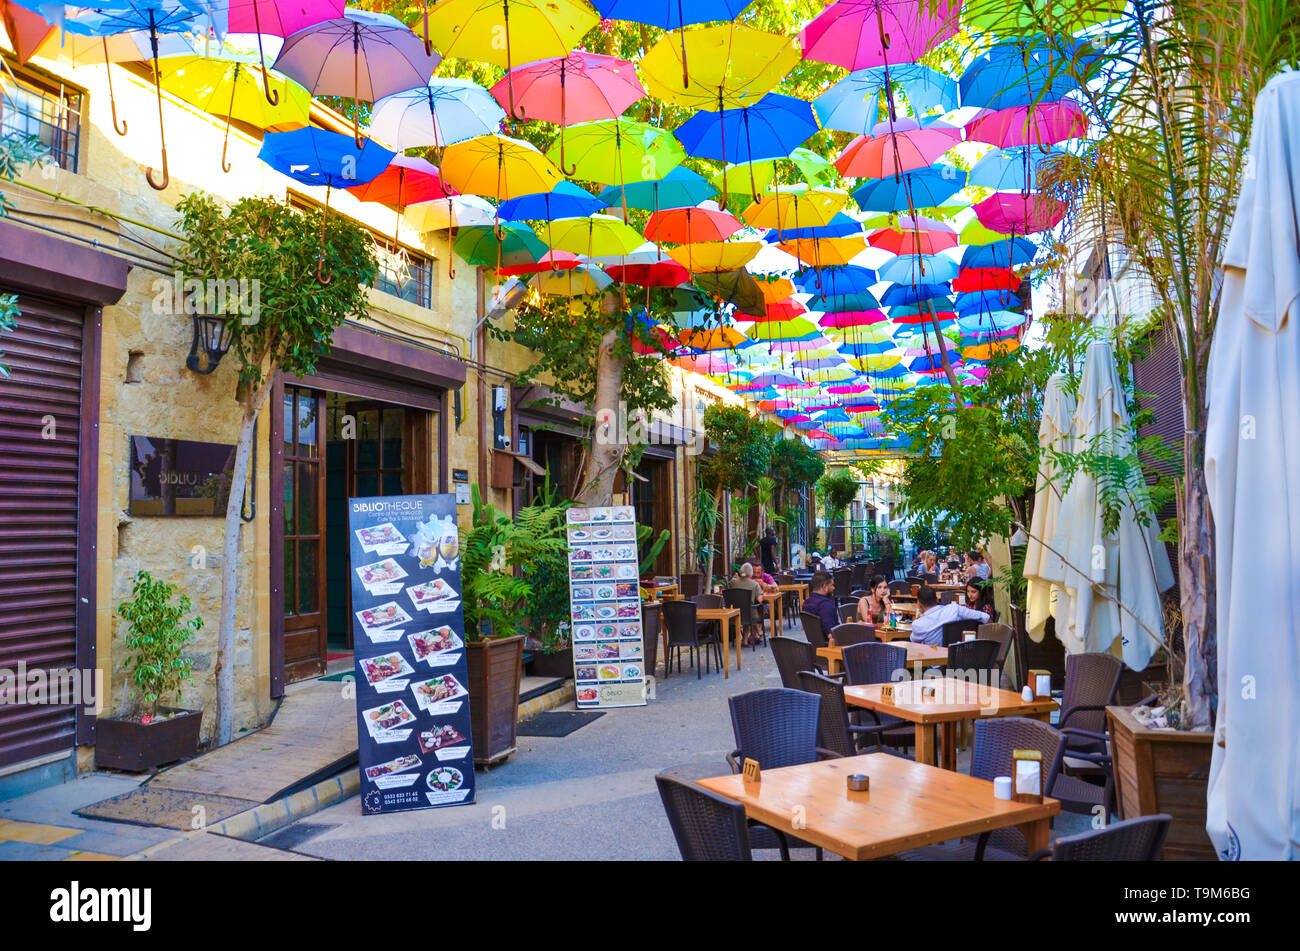 Nicosia, Cyprus - Oct 4th 2018: Outdoor cafe with amazing colorful umbrellas decorating the top of the street. Popular tourist spot in the city center Stock Photo